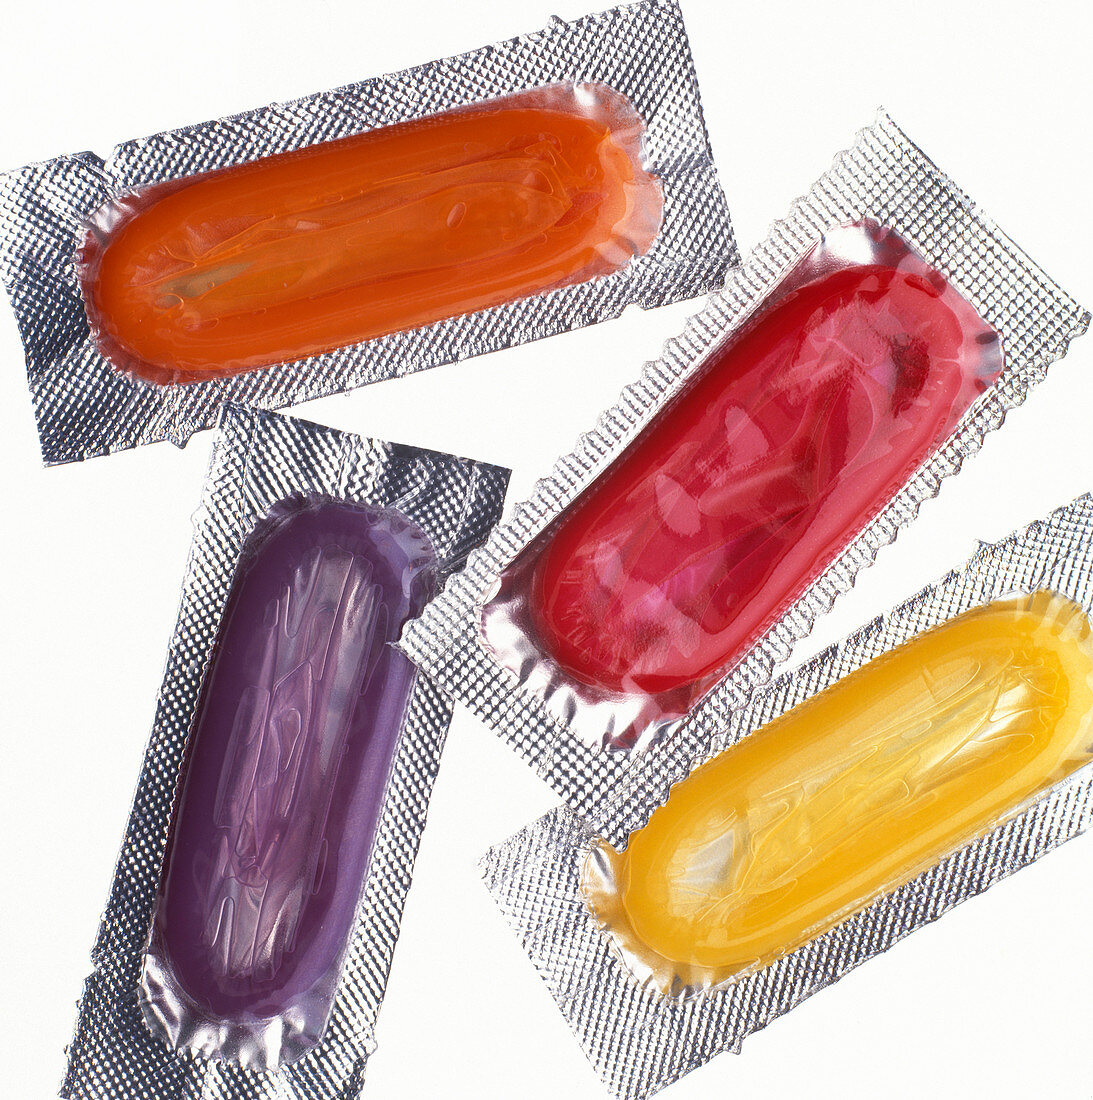 Packaged condoms